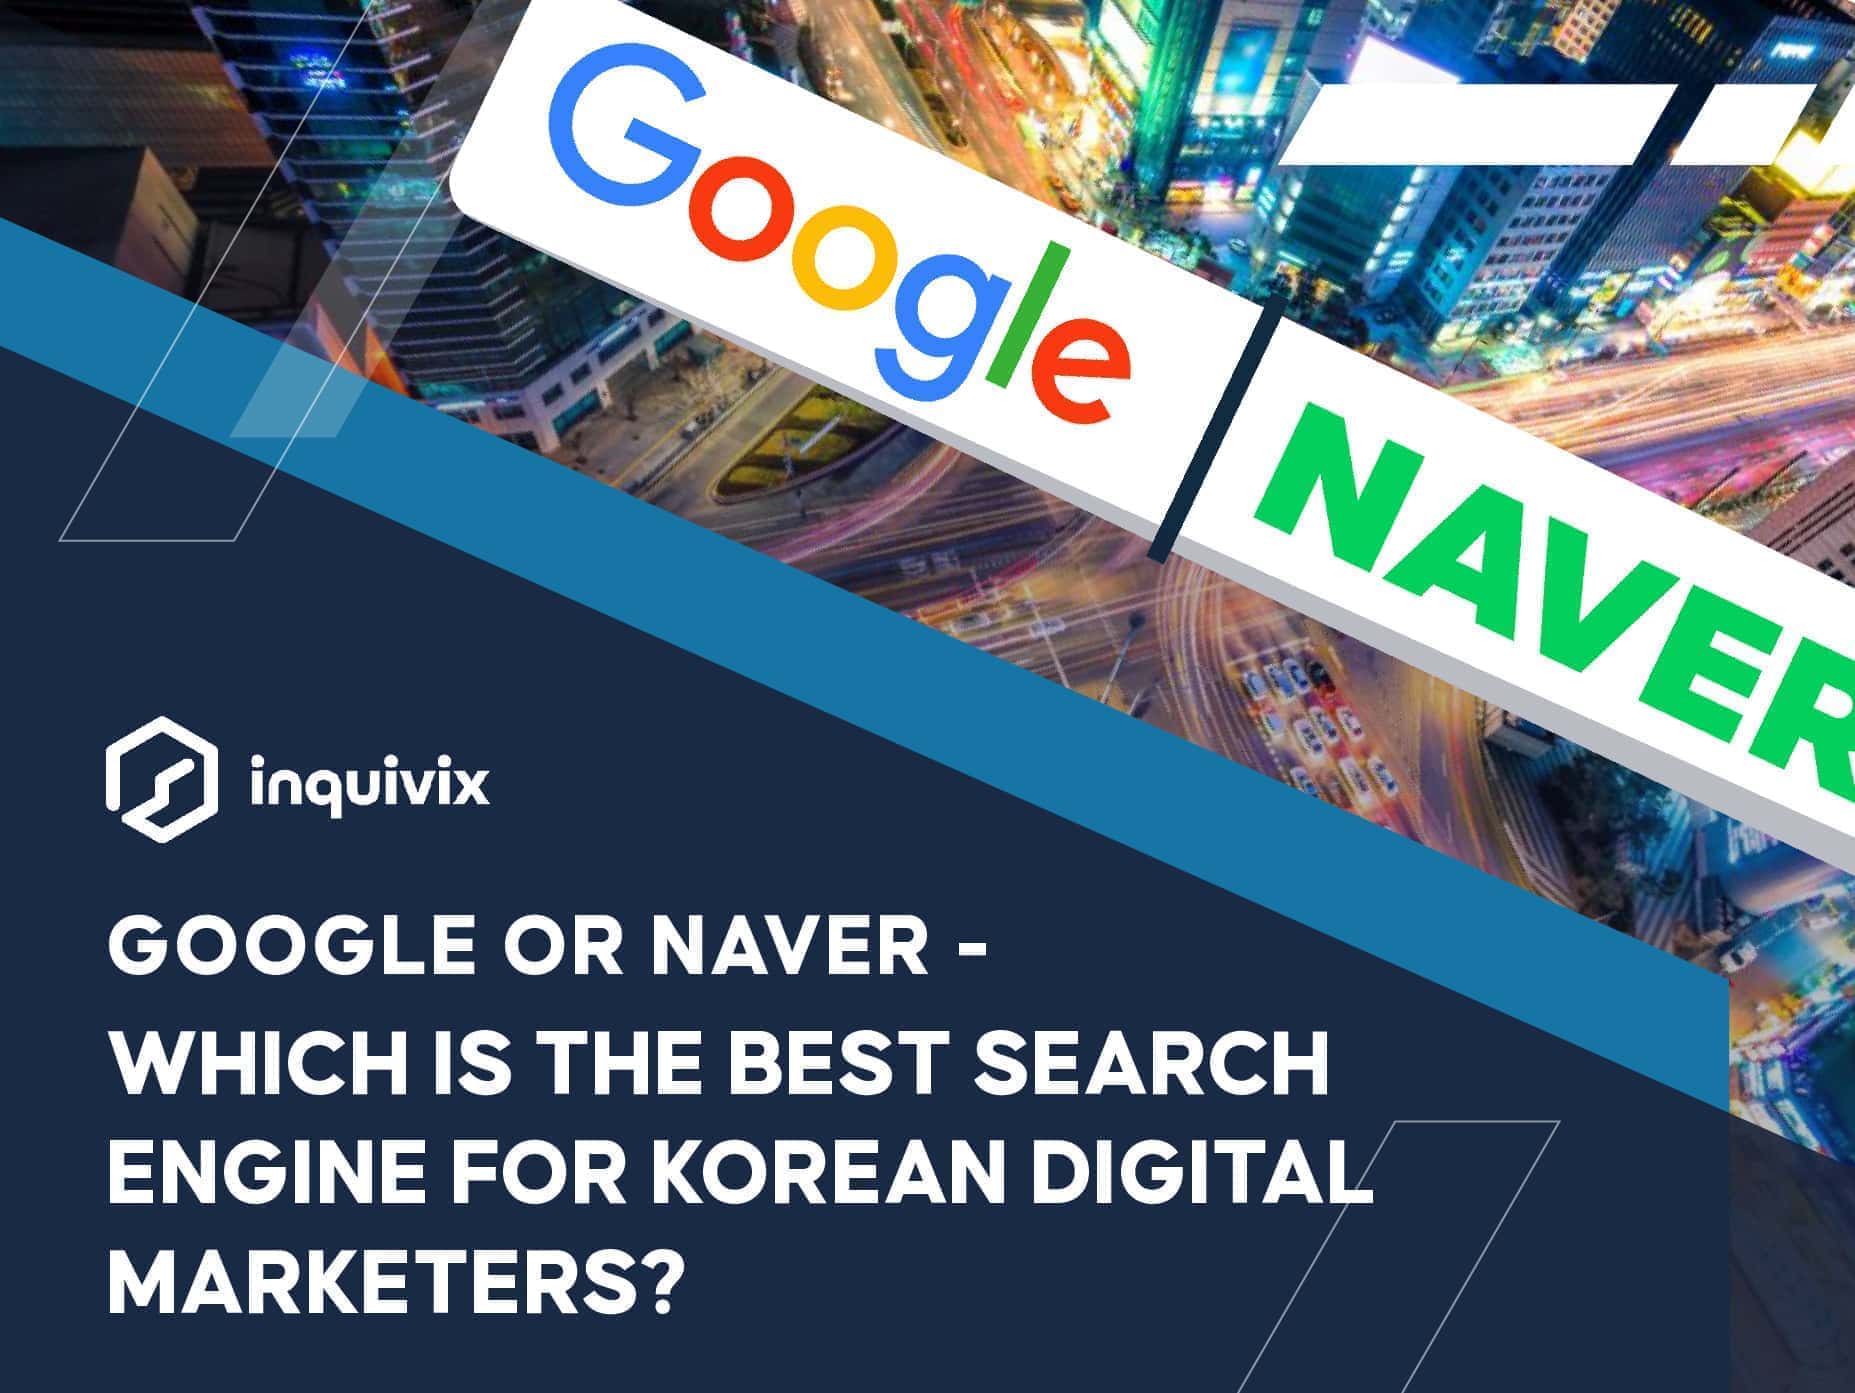 GOOGLE OR NAVER - WHICH IS THE BEST SEARCH ENGINE FOR KOREAN DIGITAL MARKETERS